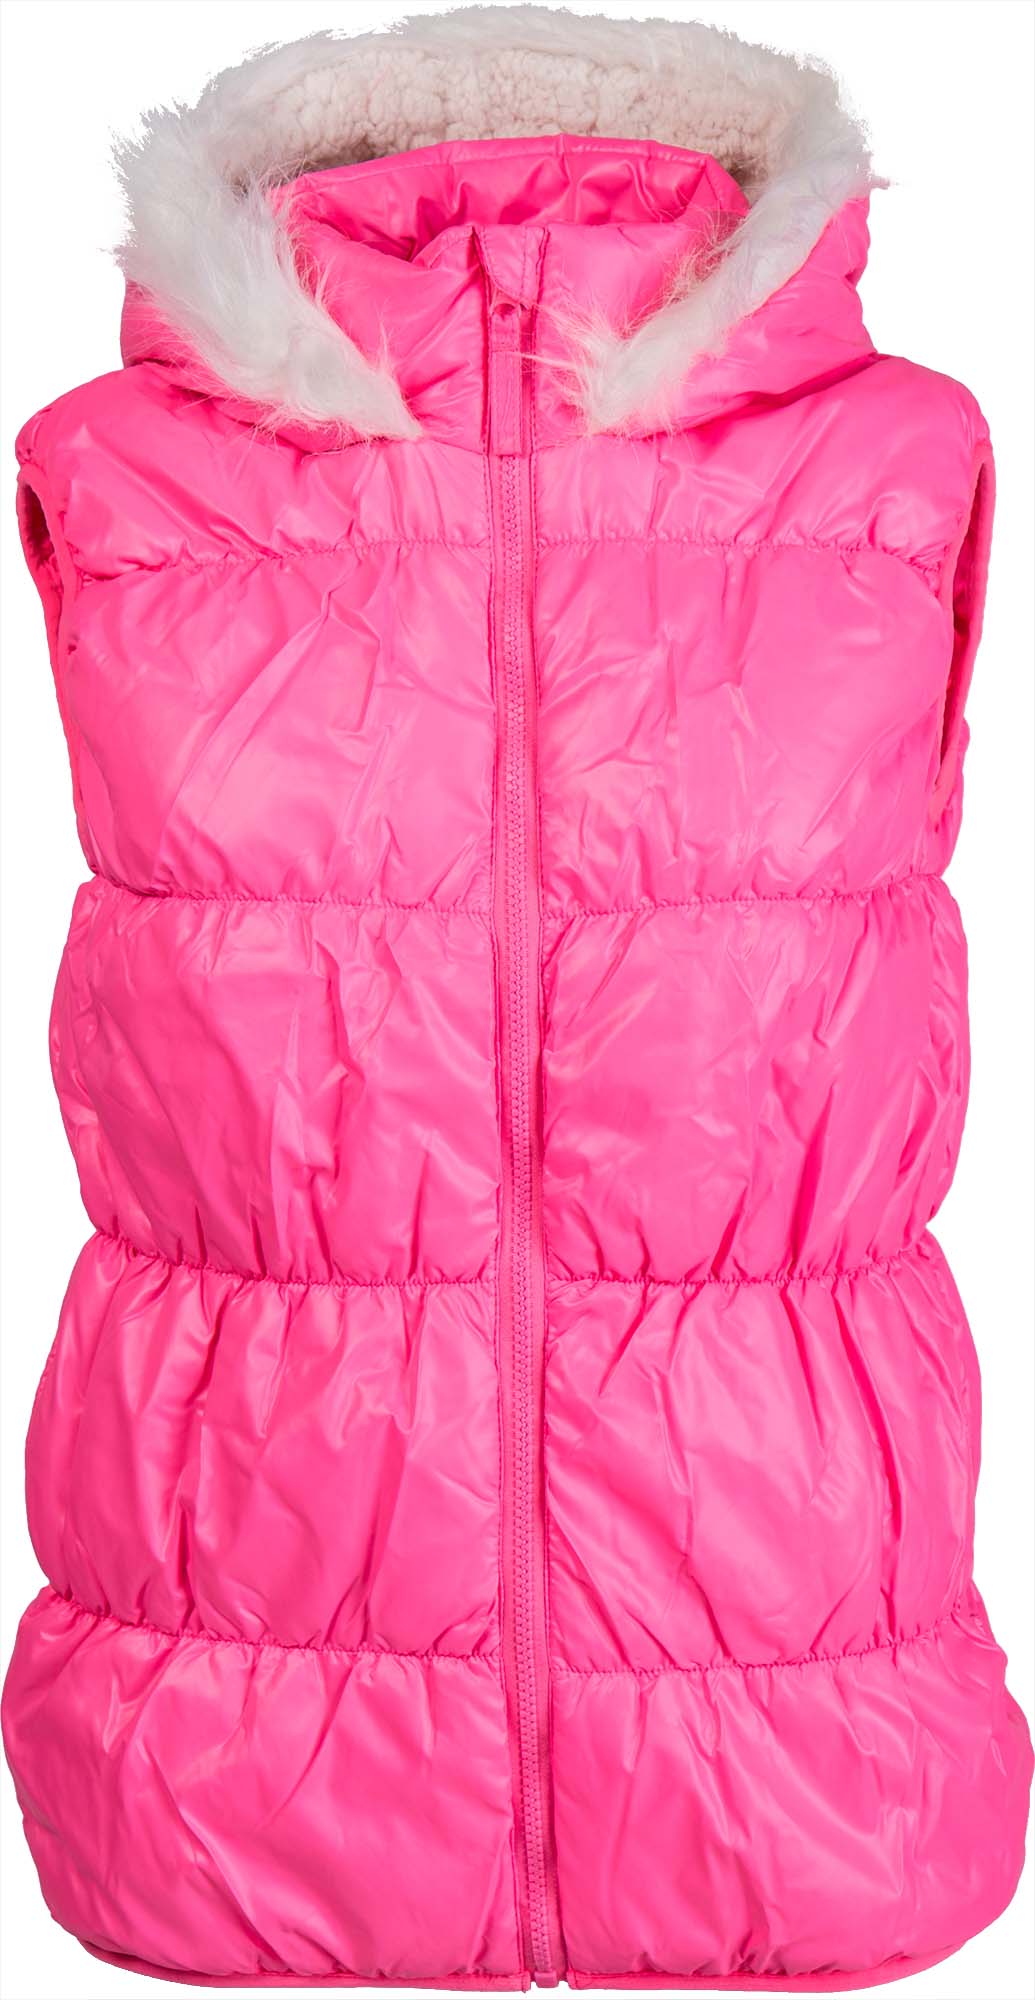 Girls’ quilted vest